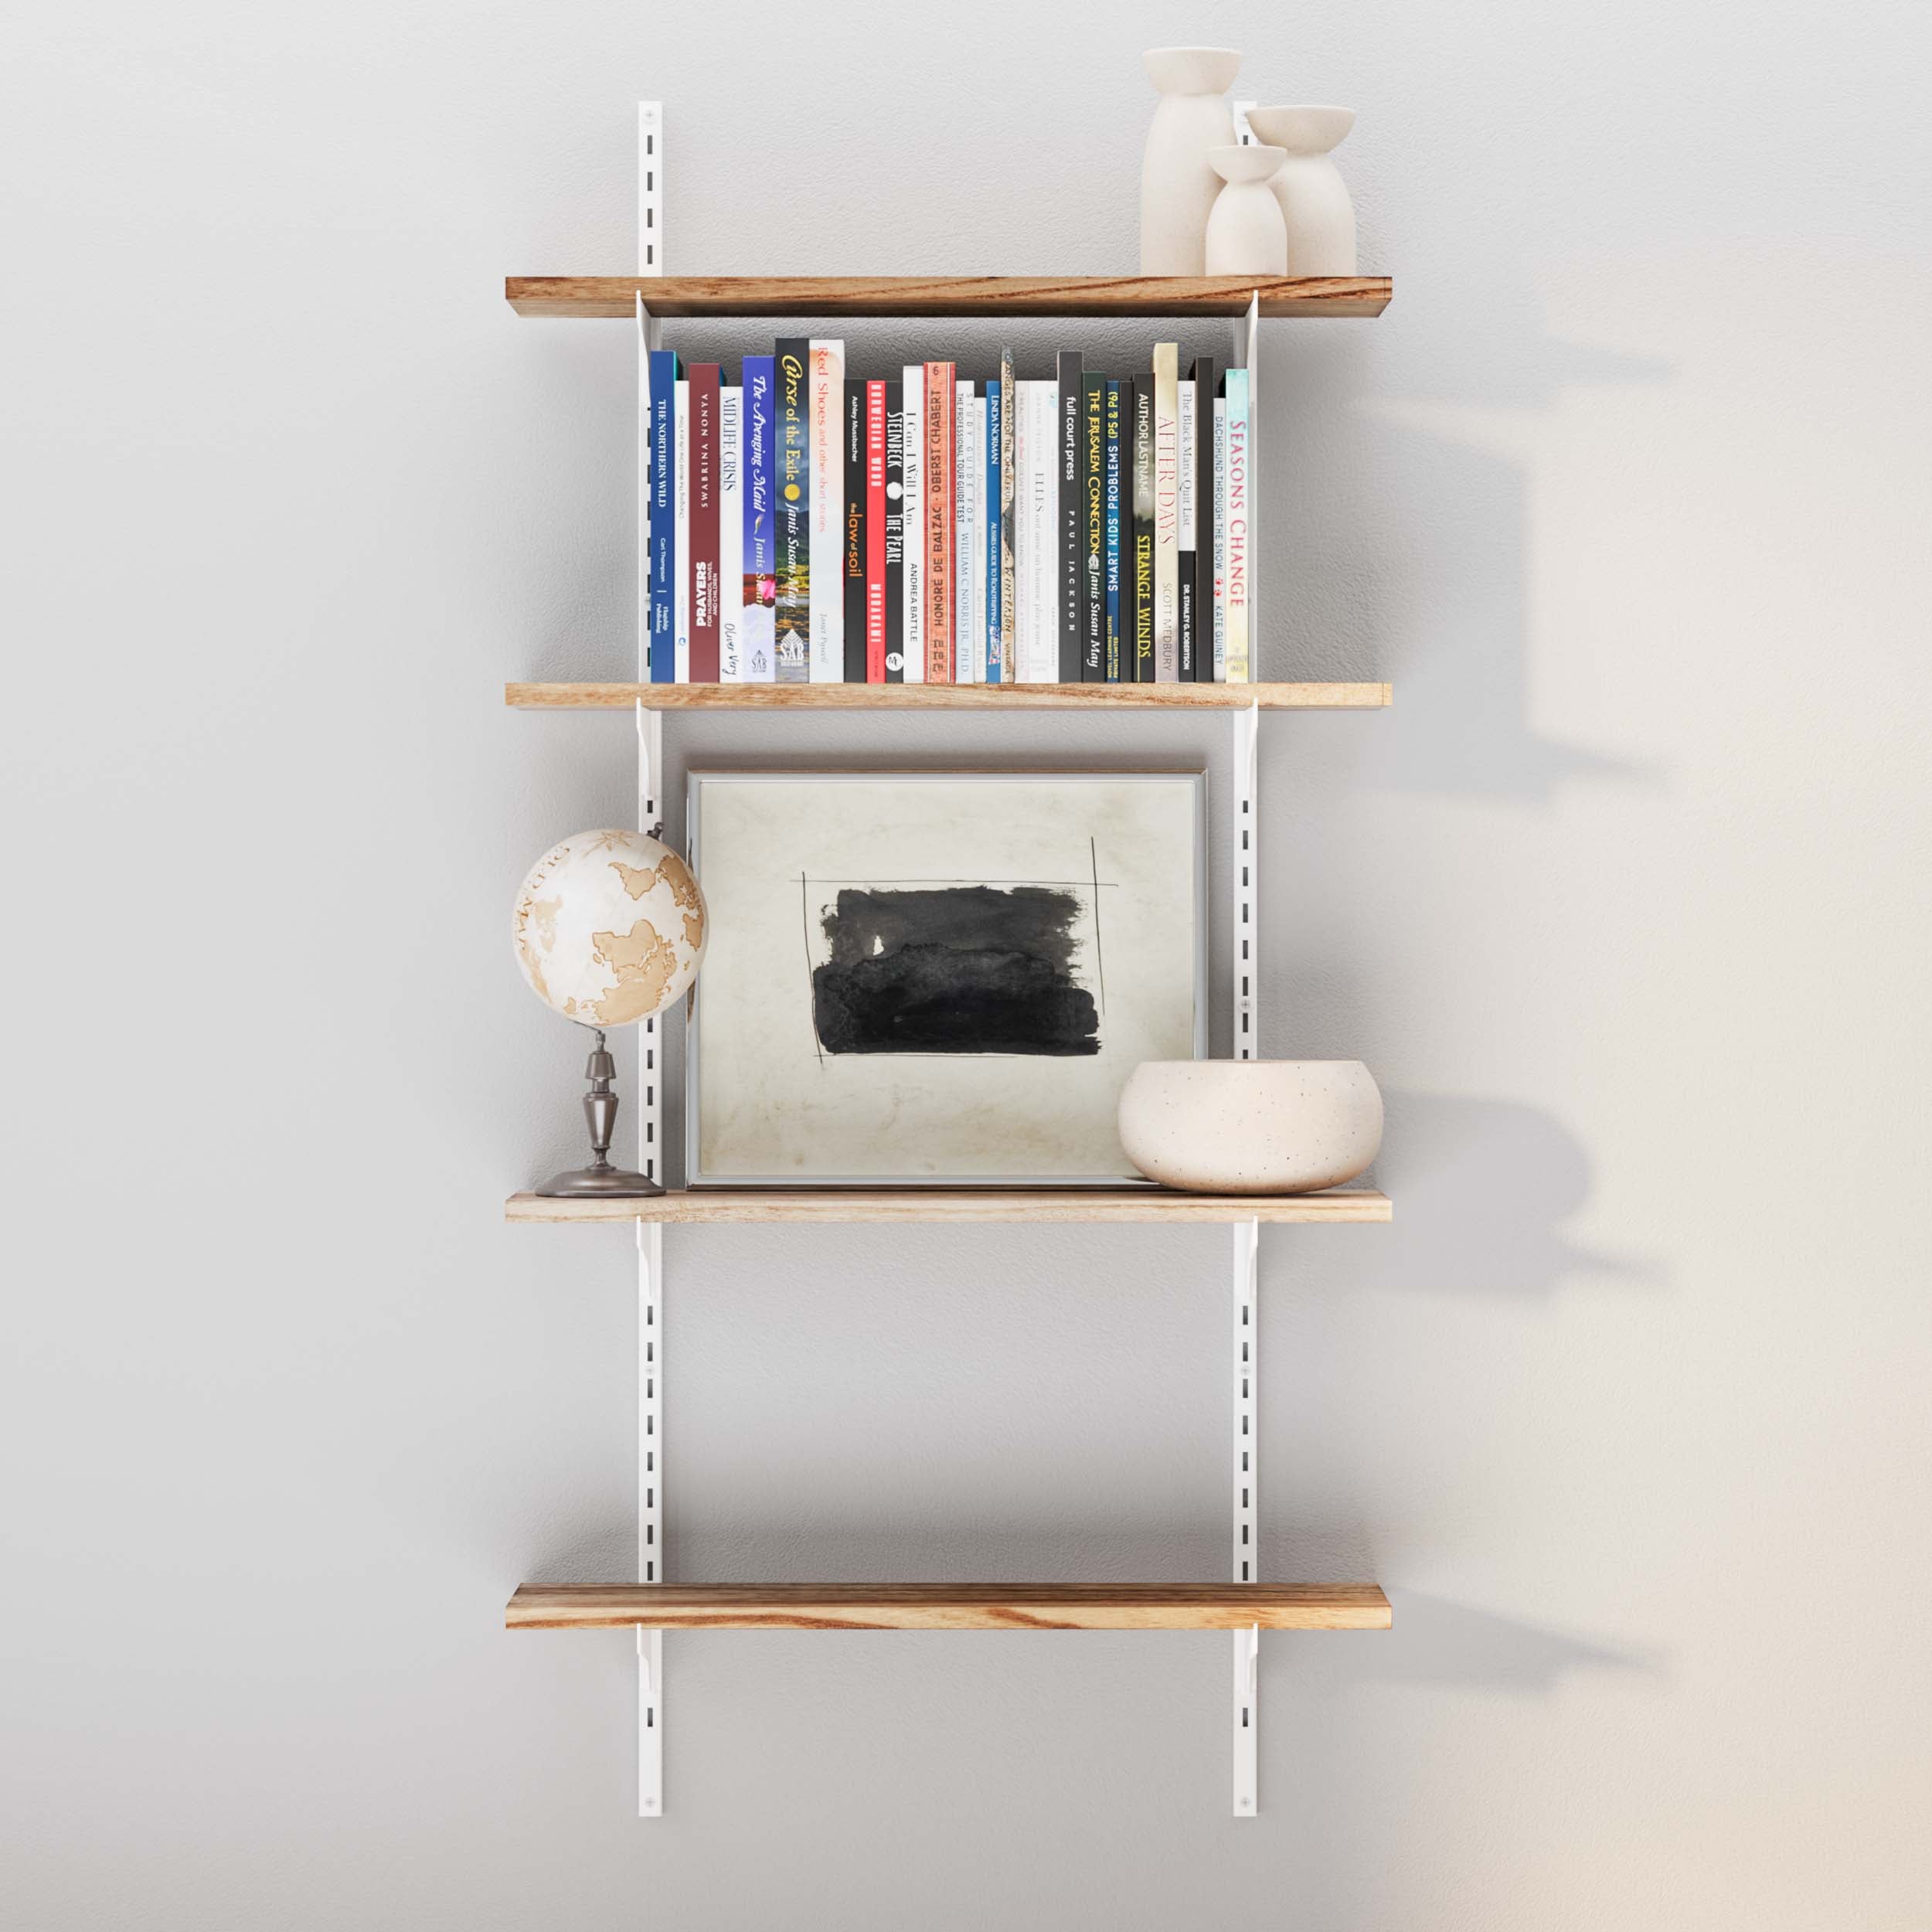 A full view of the adjustable shelves with books and decorative items on a grey wall.